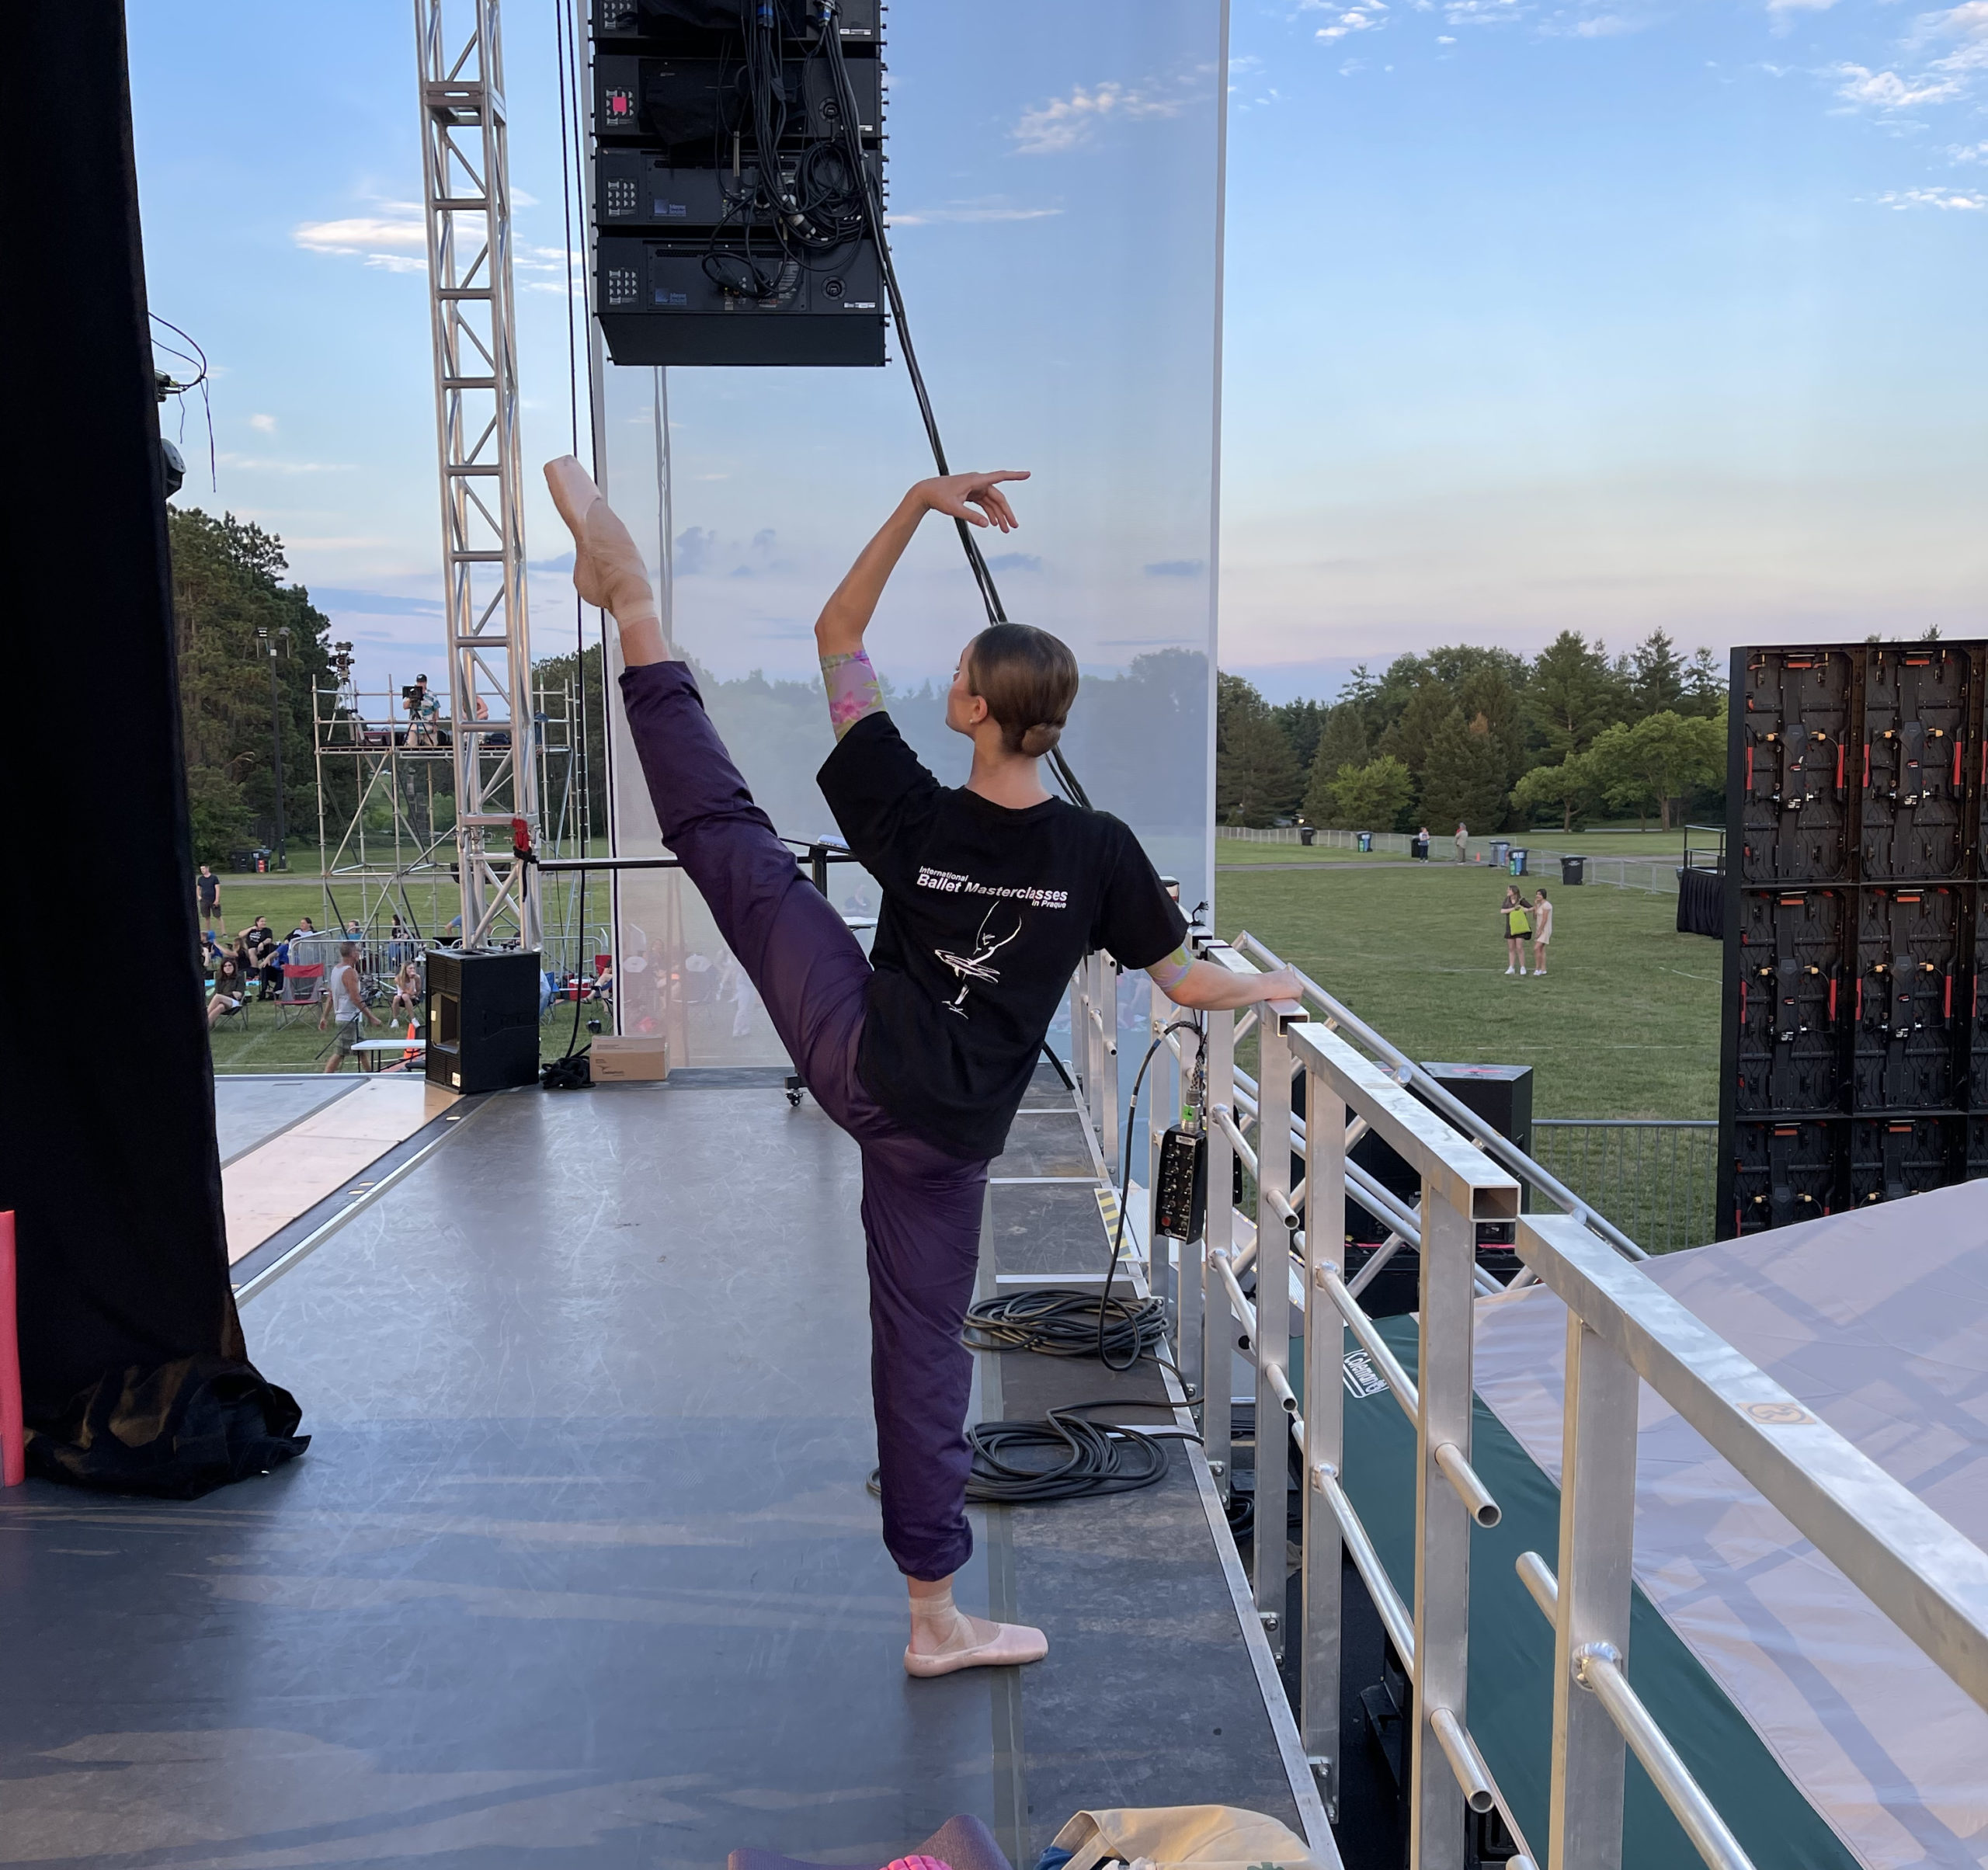 Abbey Marrison is shown from the back on an outdoor stage, holding on to a barre and doing a grand battement second with her left leg. She wears purple warm-up pants, a black T-shirt and pink pointe shoes.